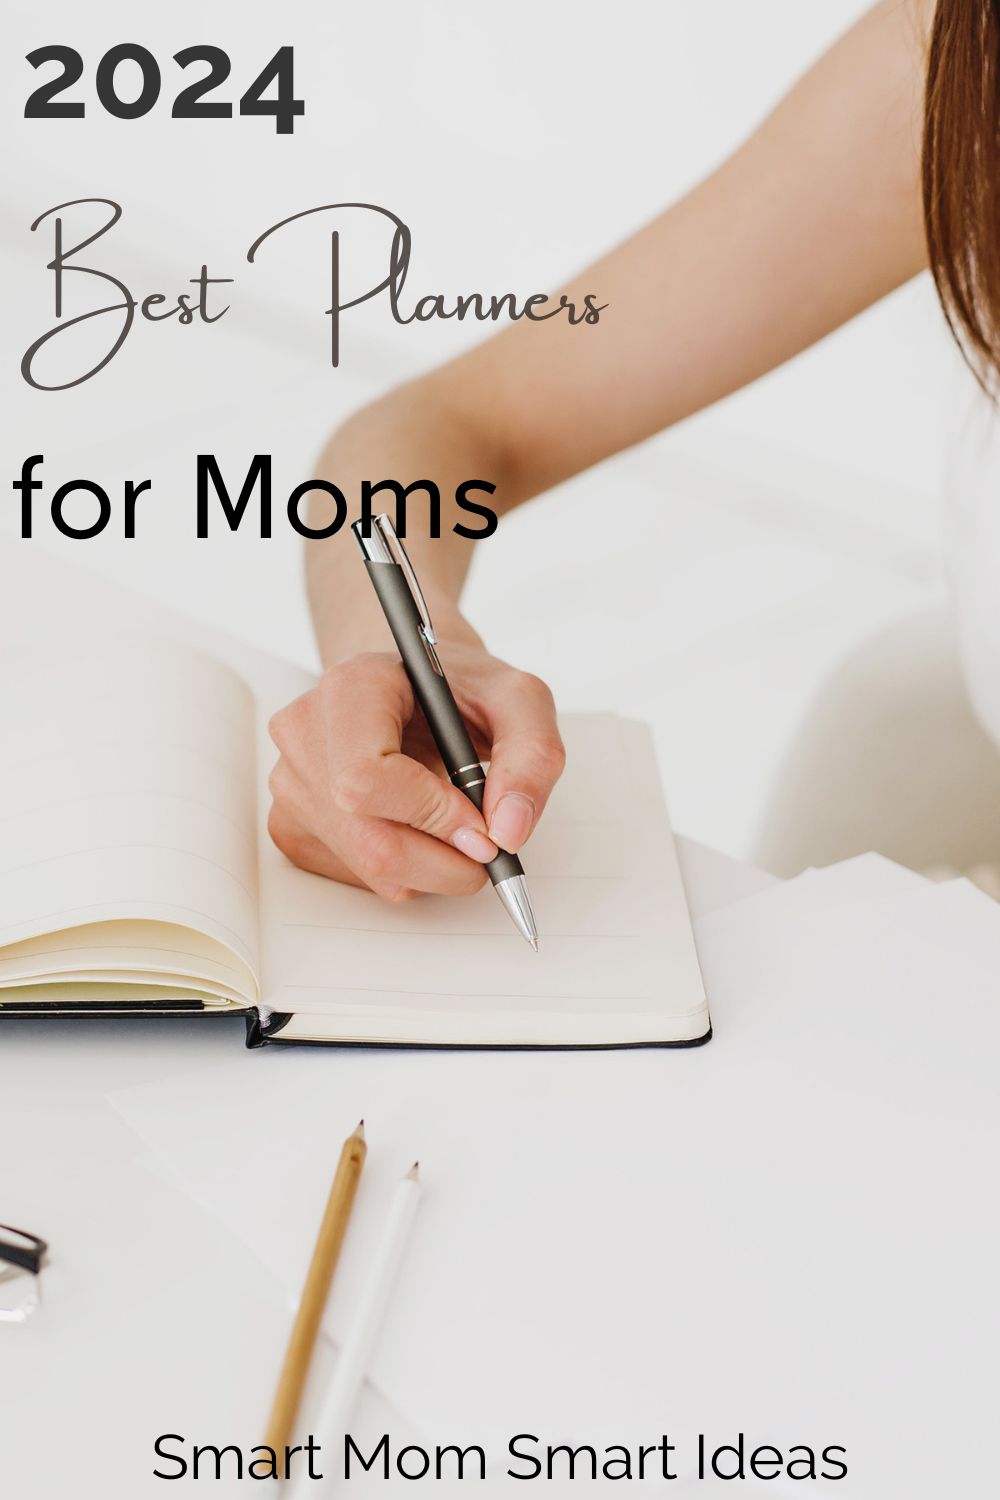 Best Planners for Moms 2024